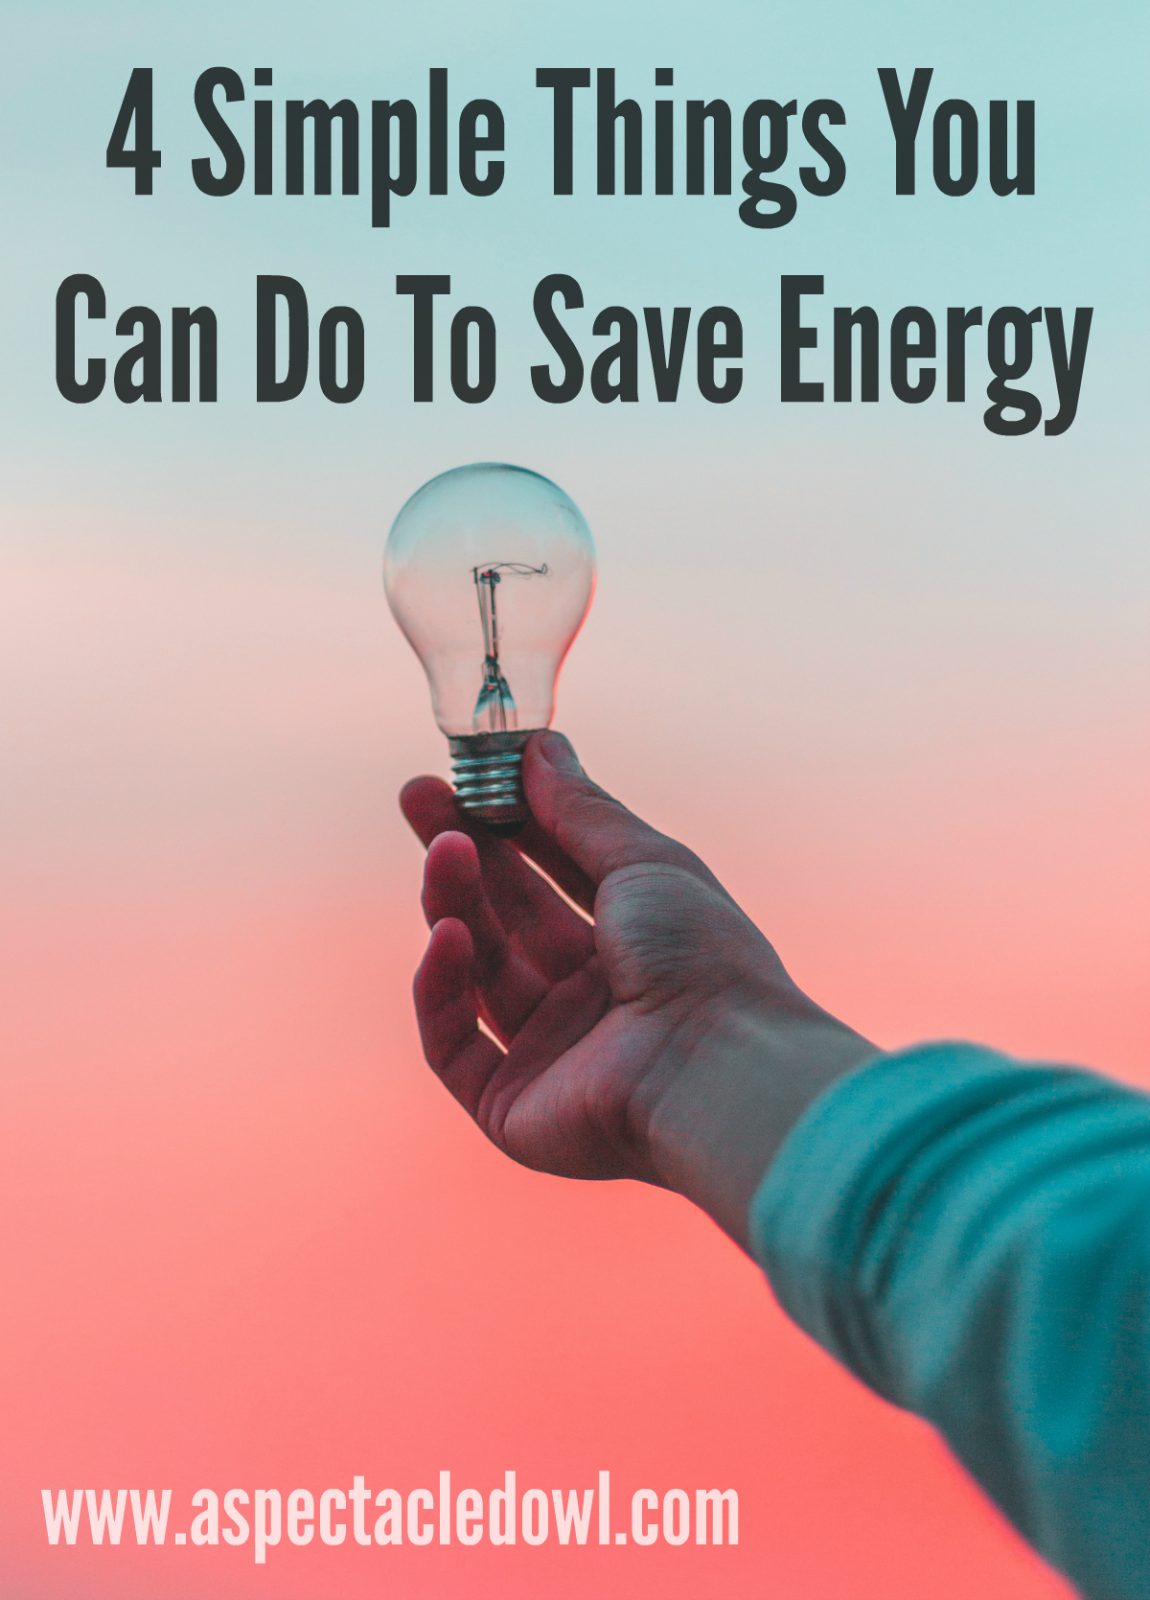 4 Simple Things You Can Do To Save Energy